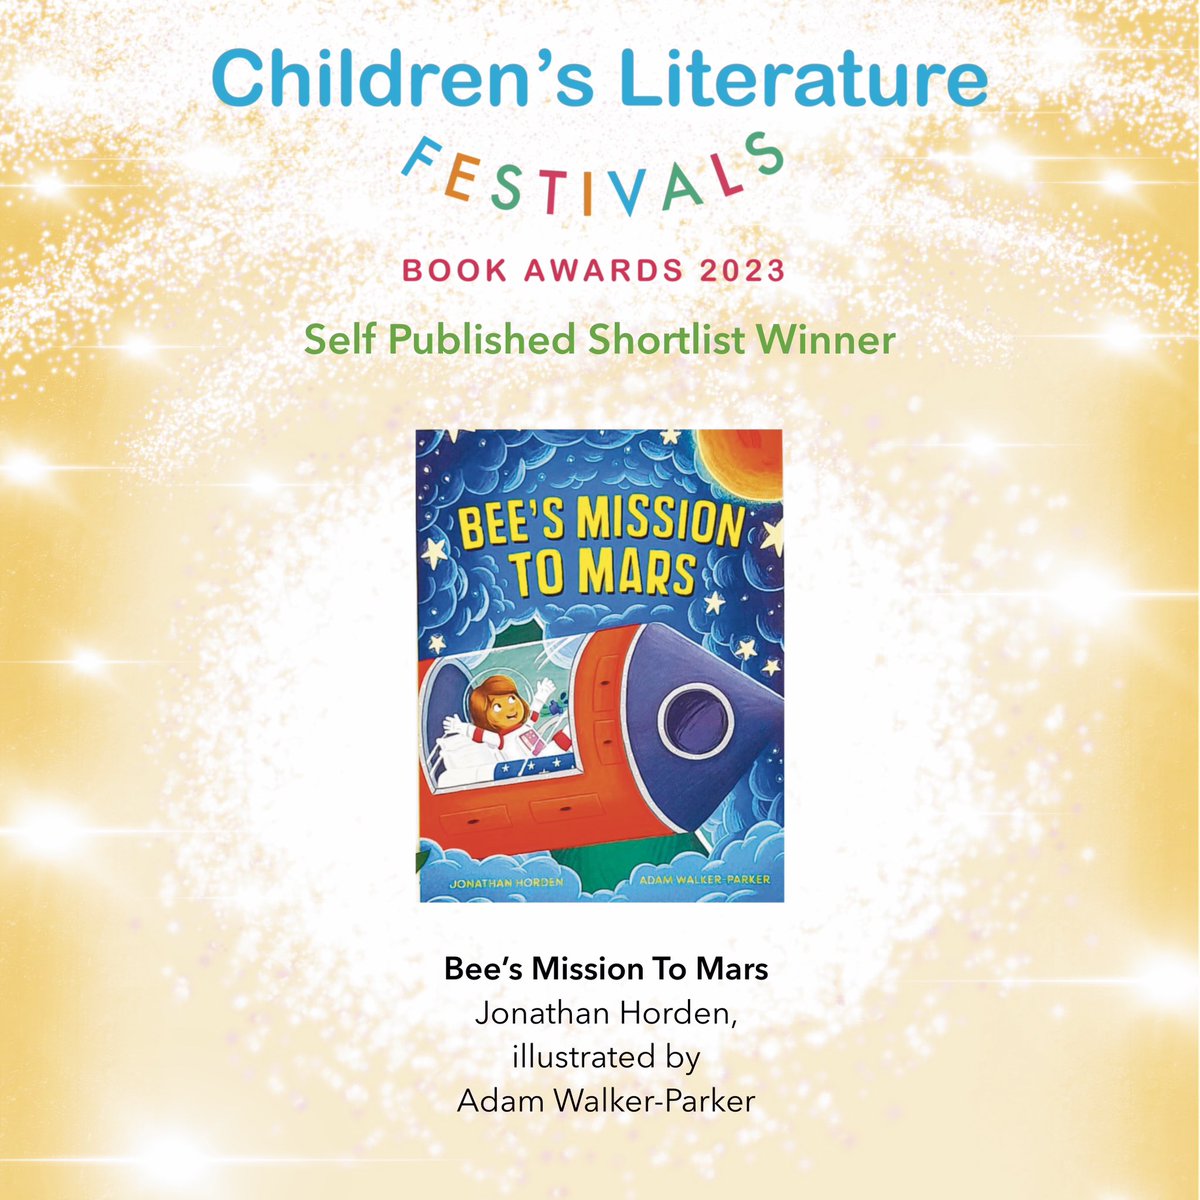 🥁🥁🥁🥁🥁Congratulations! ⭐️⭐️⭐️ @jonathanhorden Winner of the Self Published #picturebook category - in our #clfbookawards 📚 @ChildrensLFests 
Bee’s Mission To Mars
#childrensbookaward #NCDUK2023 🤗